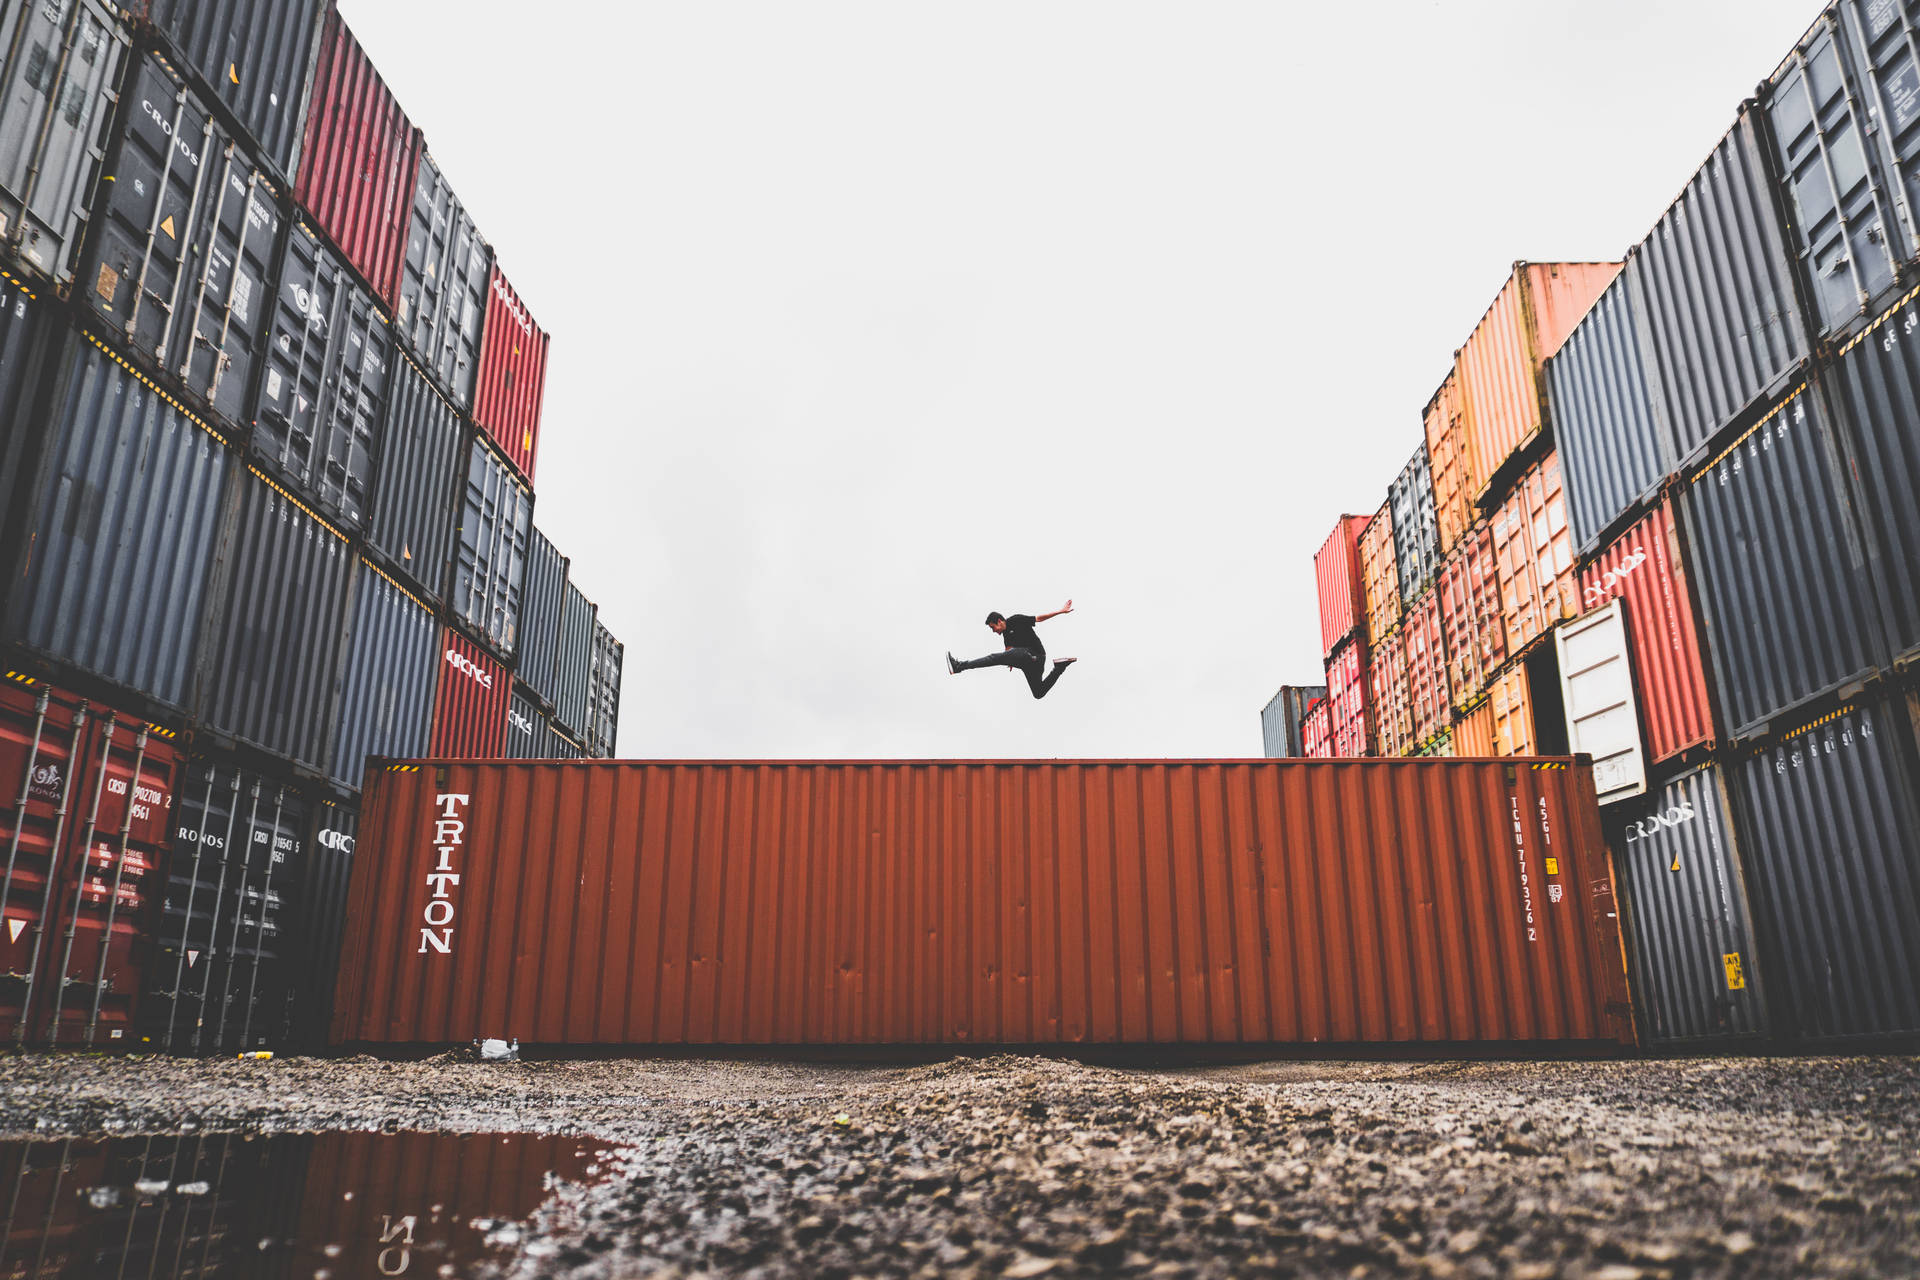 Caption: Fearless Leap Amidst Shipping Containers Wallpaper